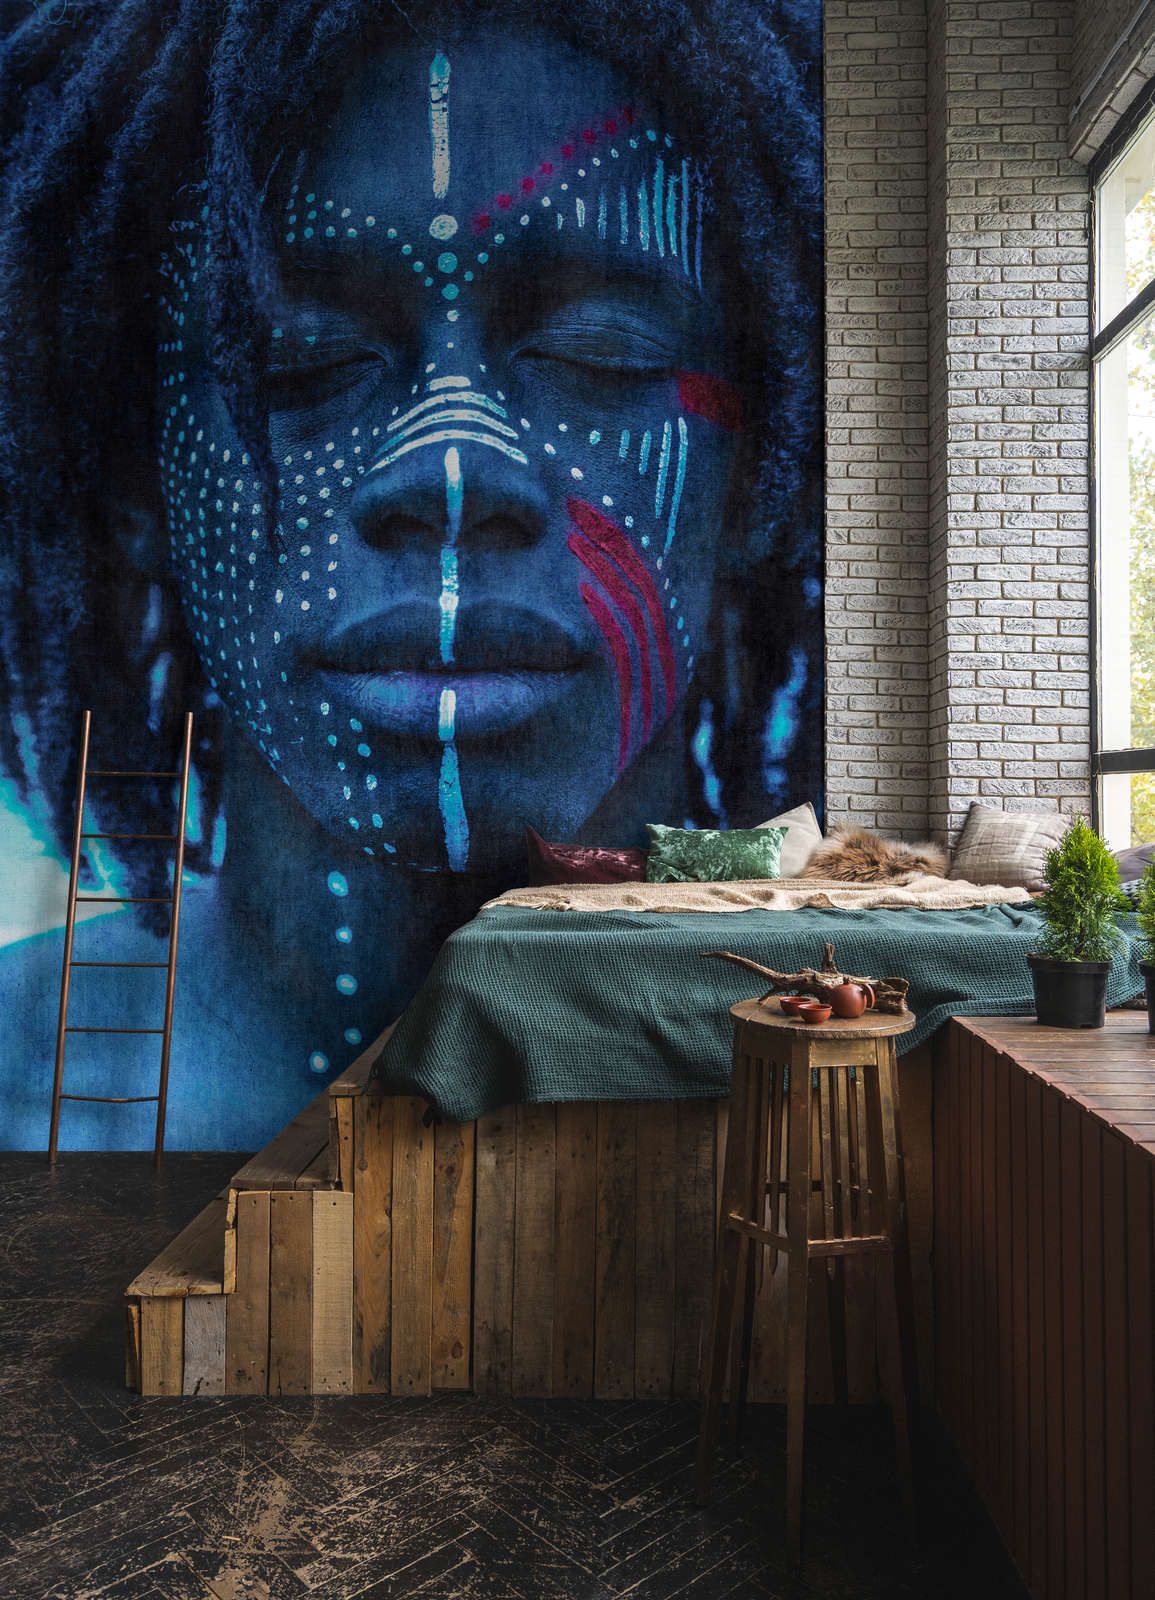             Photo wallpaper »mikala« - African portrait blue with tapestry structure - Lightly textured non-woven fabric
        